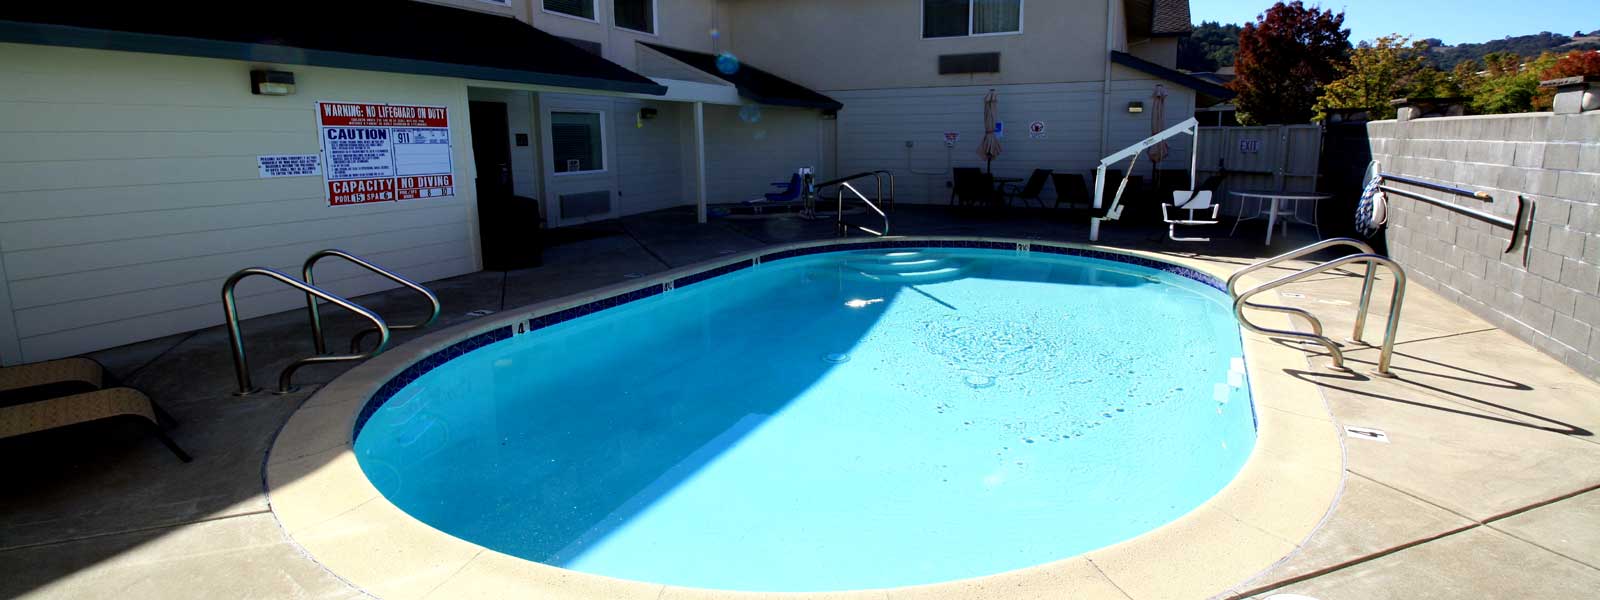 Motels in Cloverdale Budget Discount 3 Star Rating 